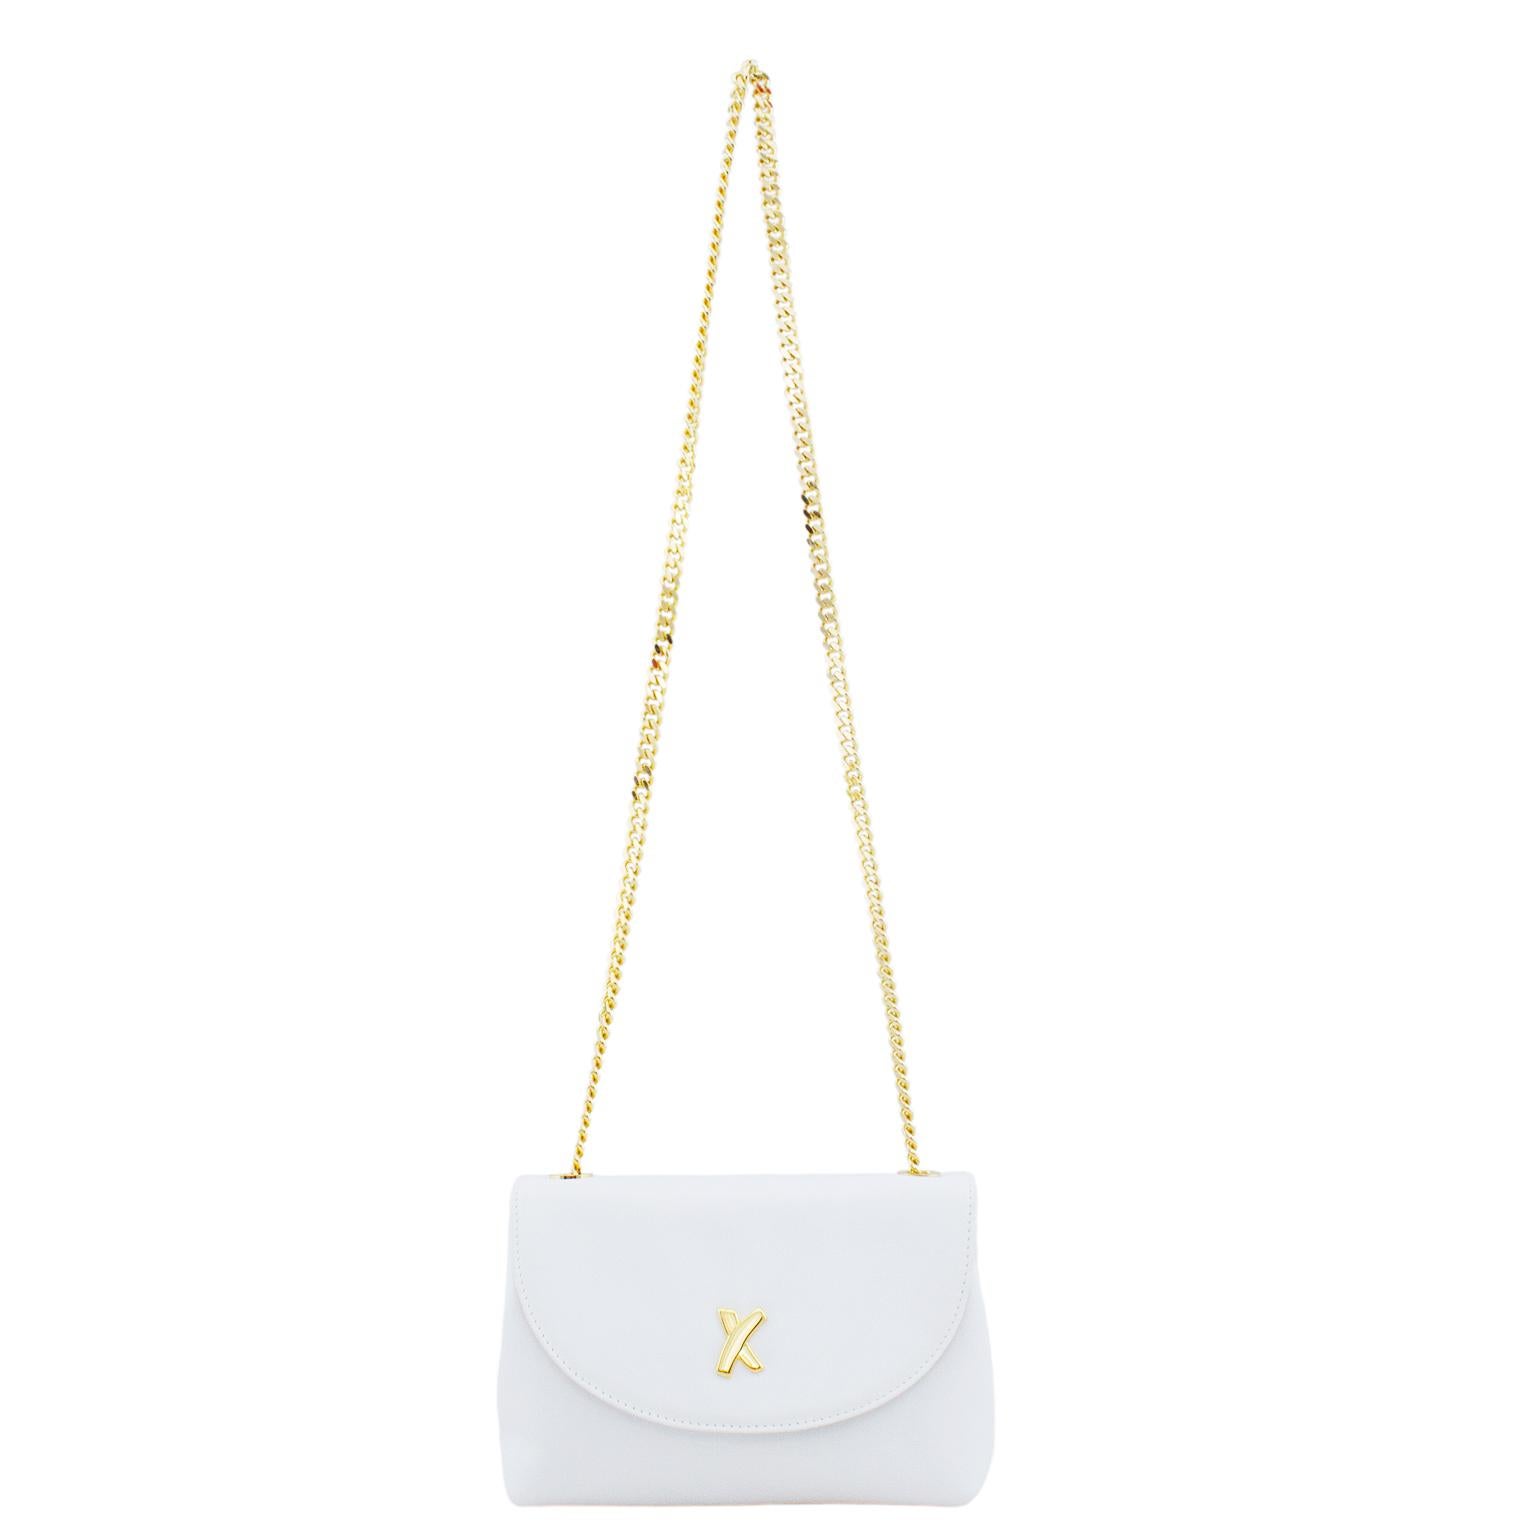 Paloma Piccaso small white leather bag from the 1980s. Gold tone hardware and very substantial 21